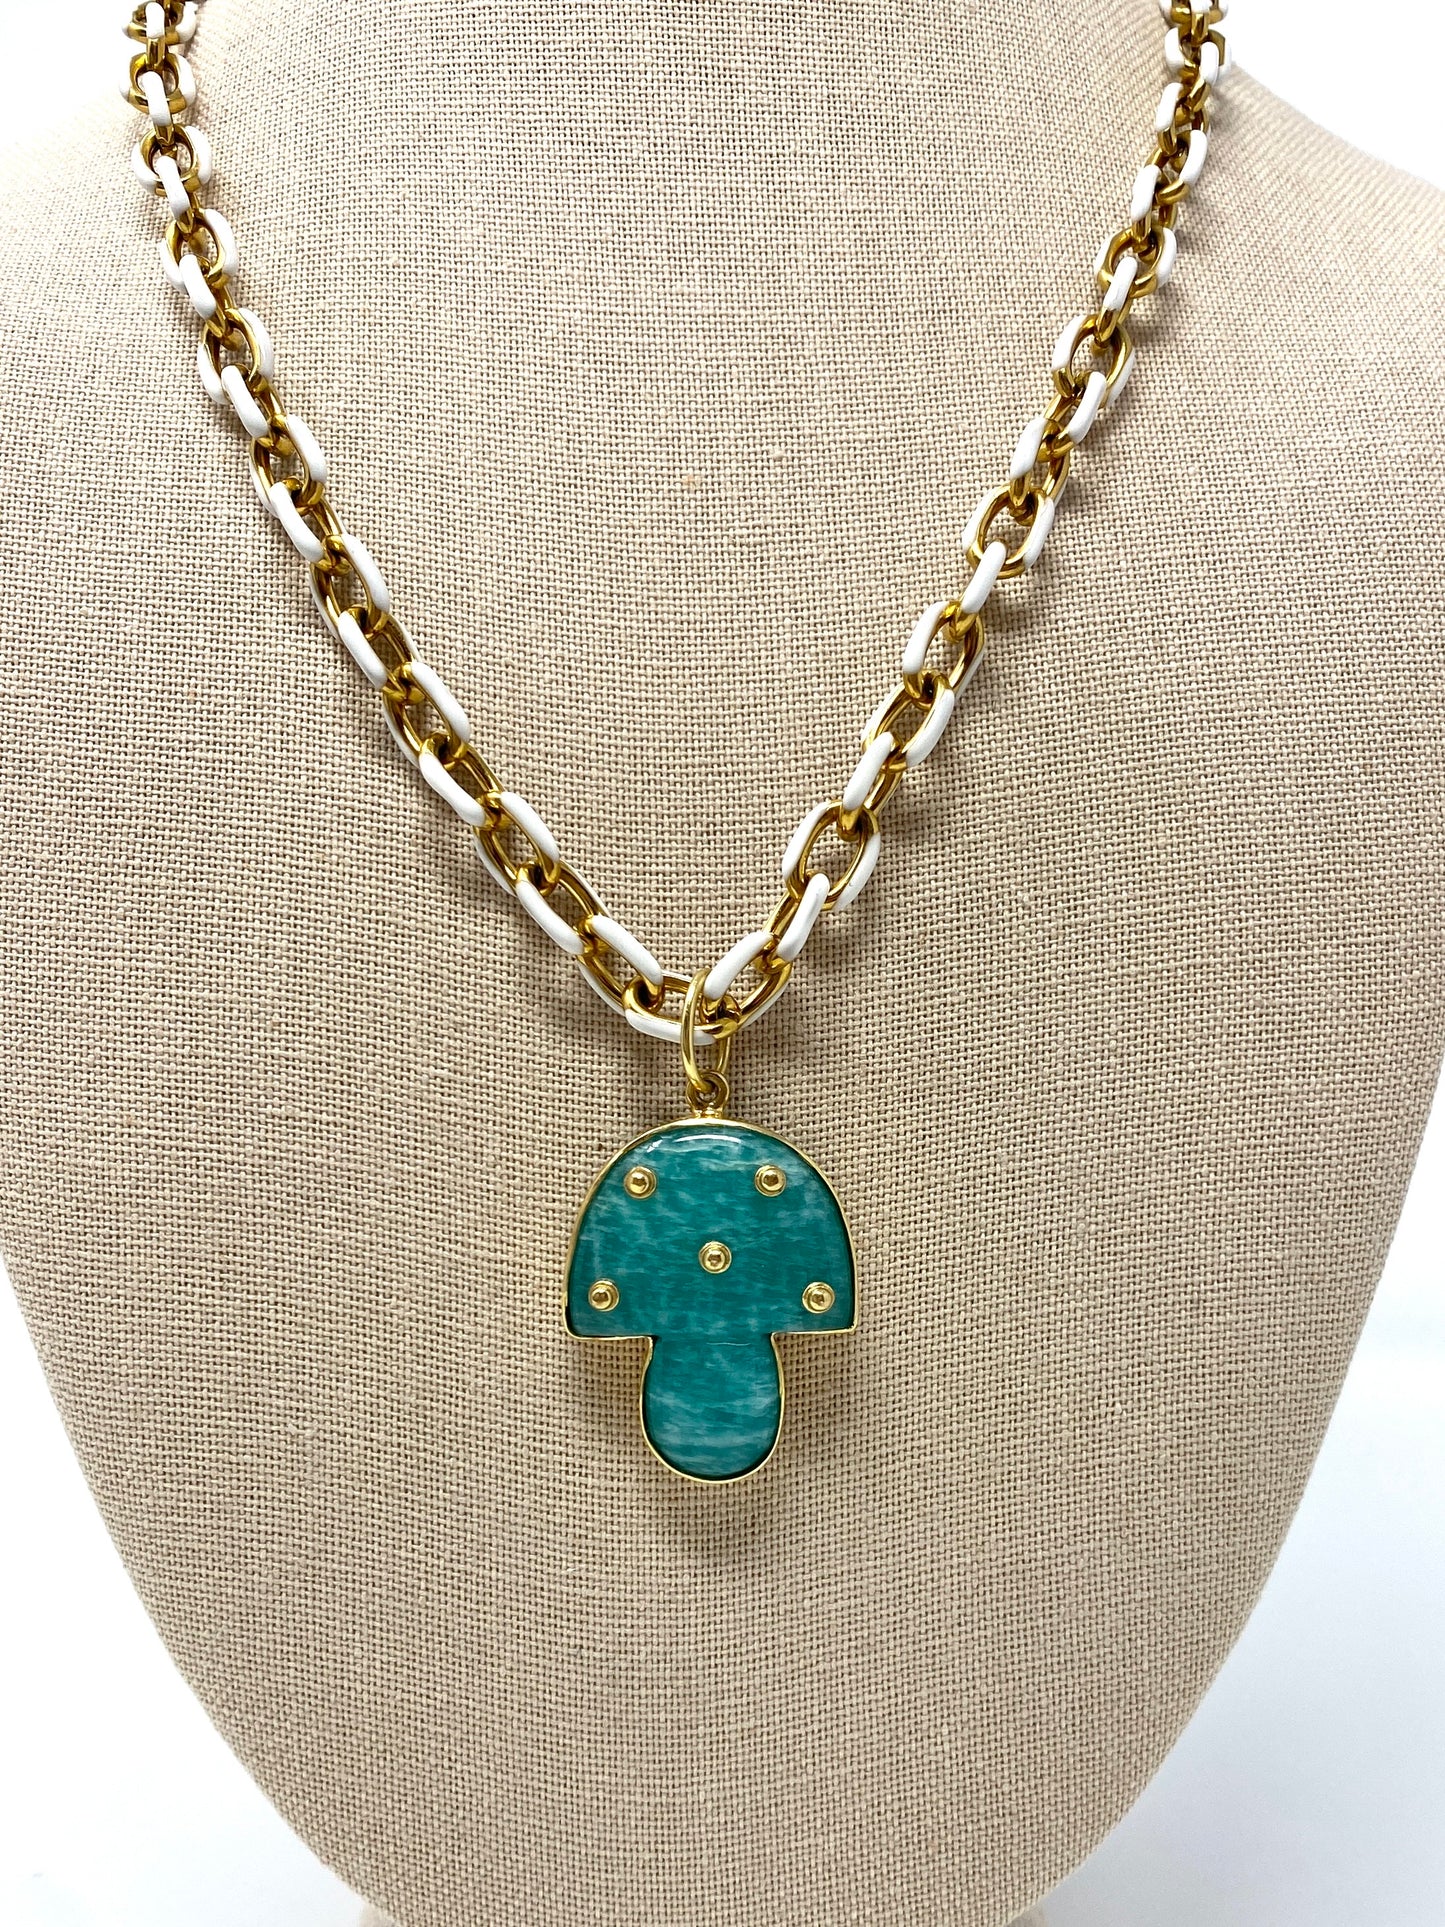 White Enamel and Gold Plated Chain Necklace With Amazonite and Gold Mushroom Pendant